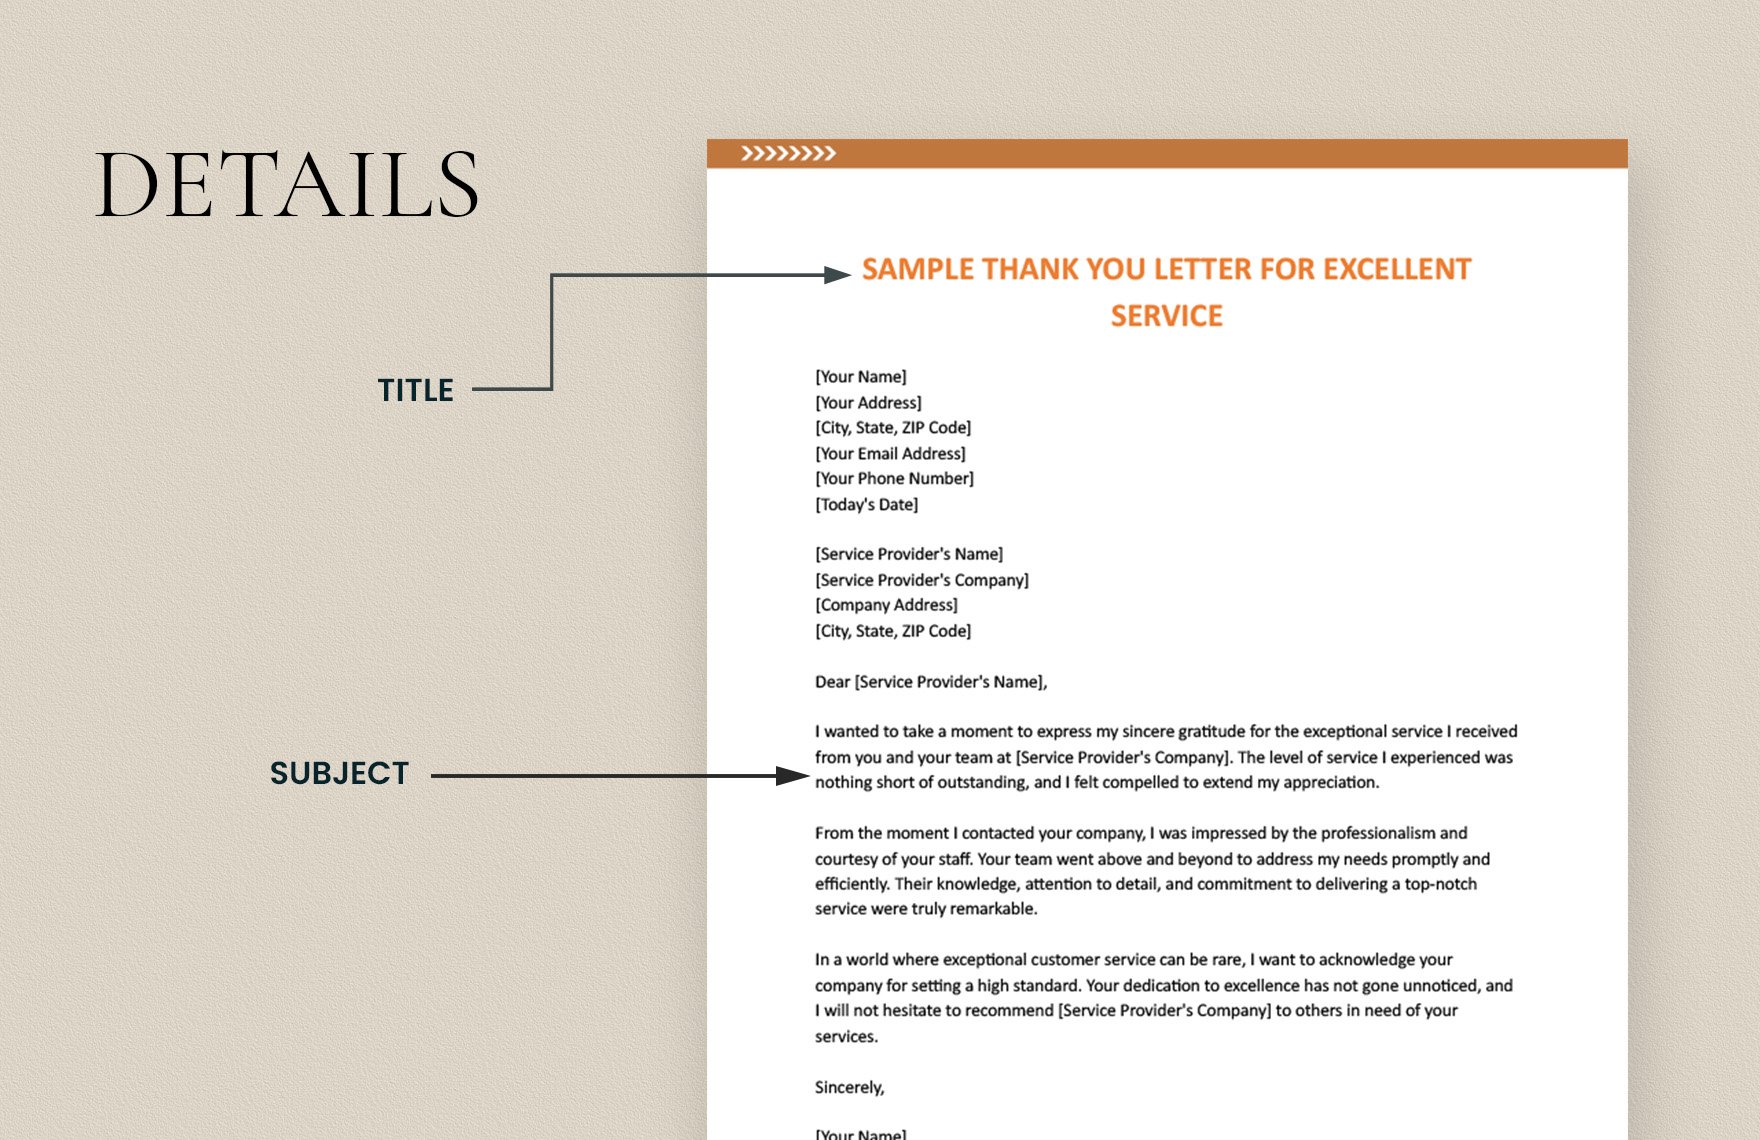 Sample Thank You Letter for Excellent Service Template